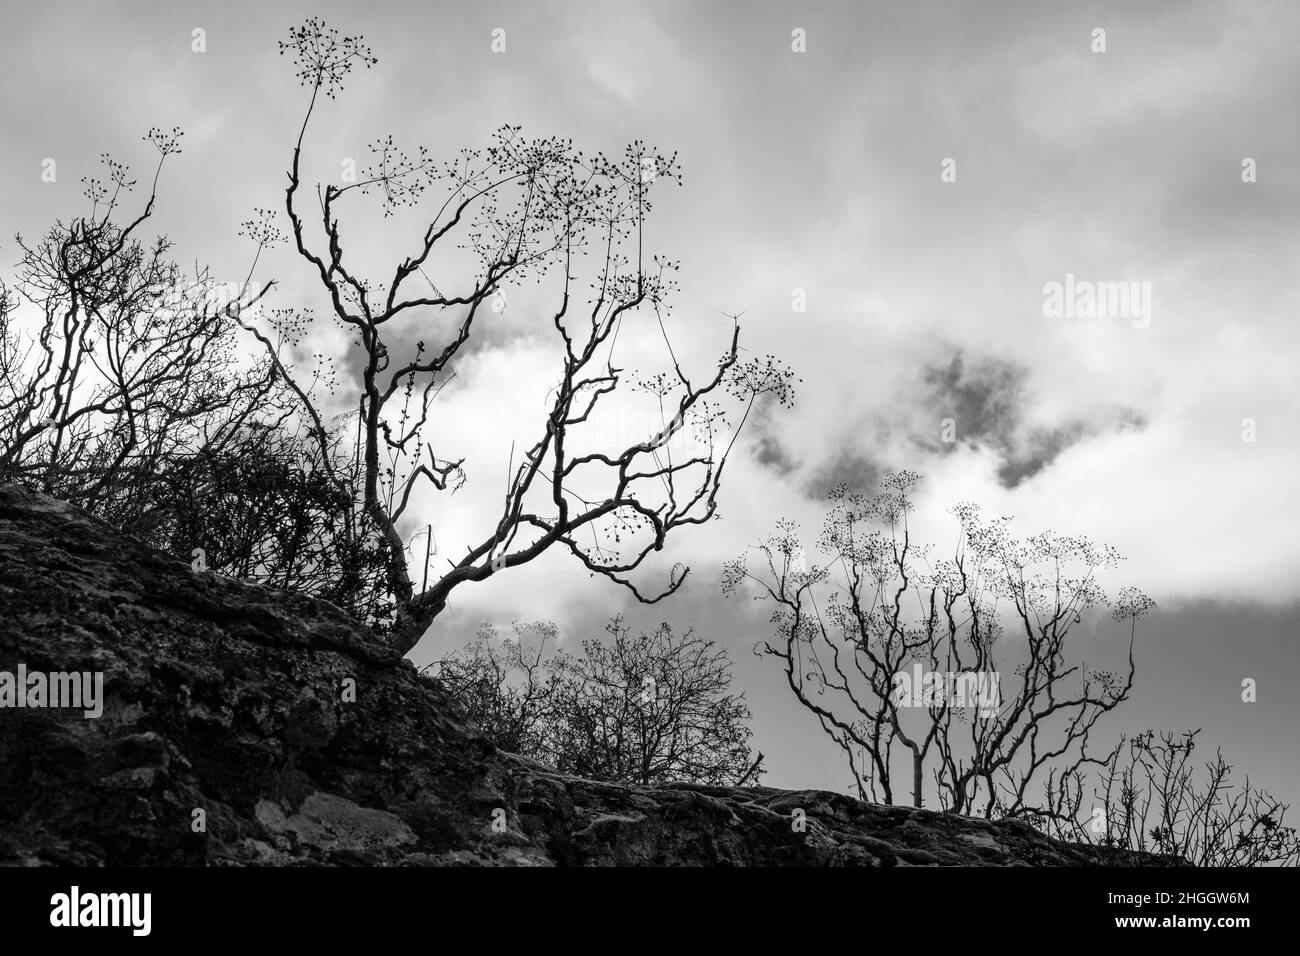 Bare shrubs against a cloudy sky in moody monochrome, black and white, Taucho, Adeje, Tenerife, Canary Islands, Spain Stock Photo